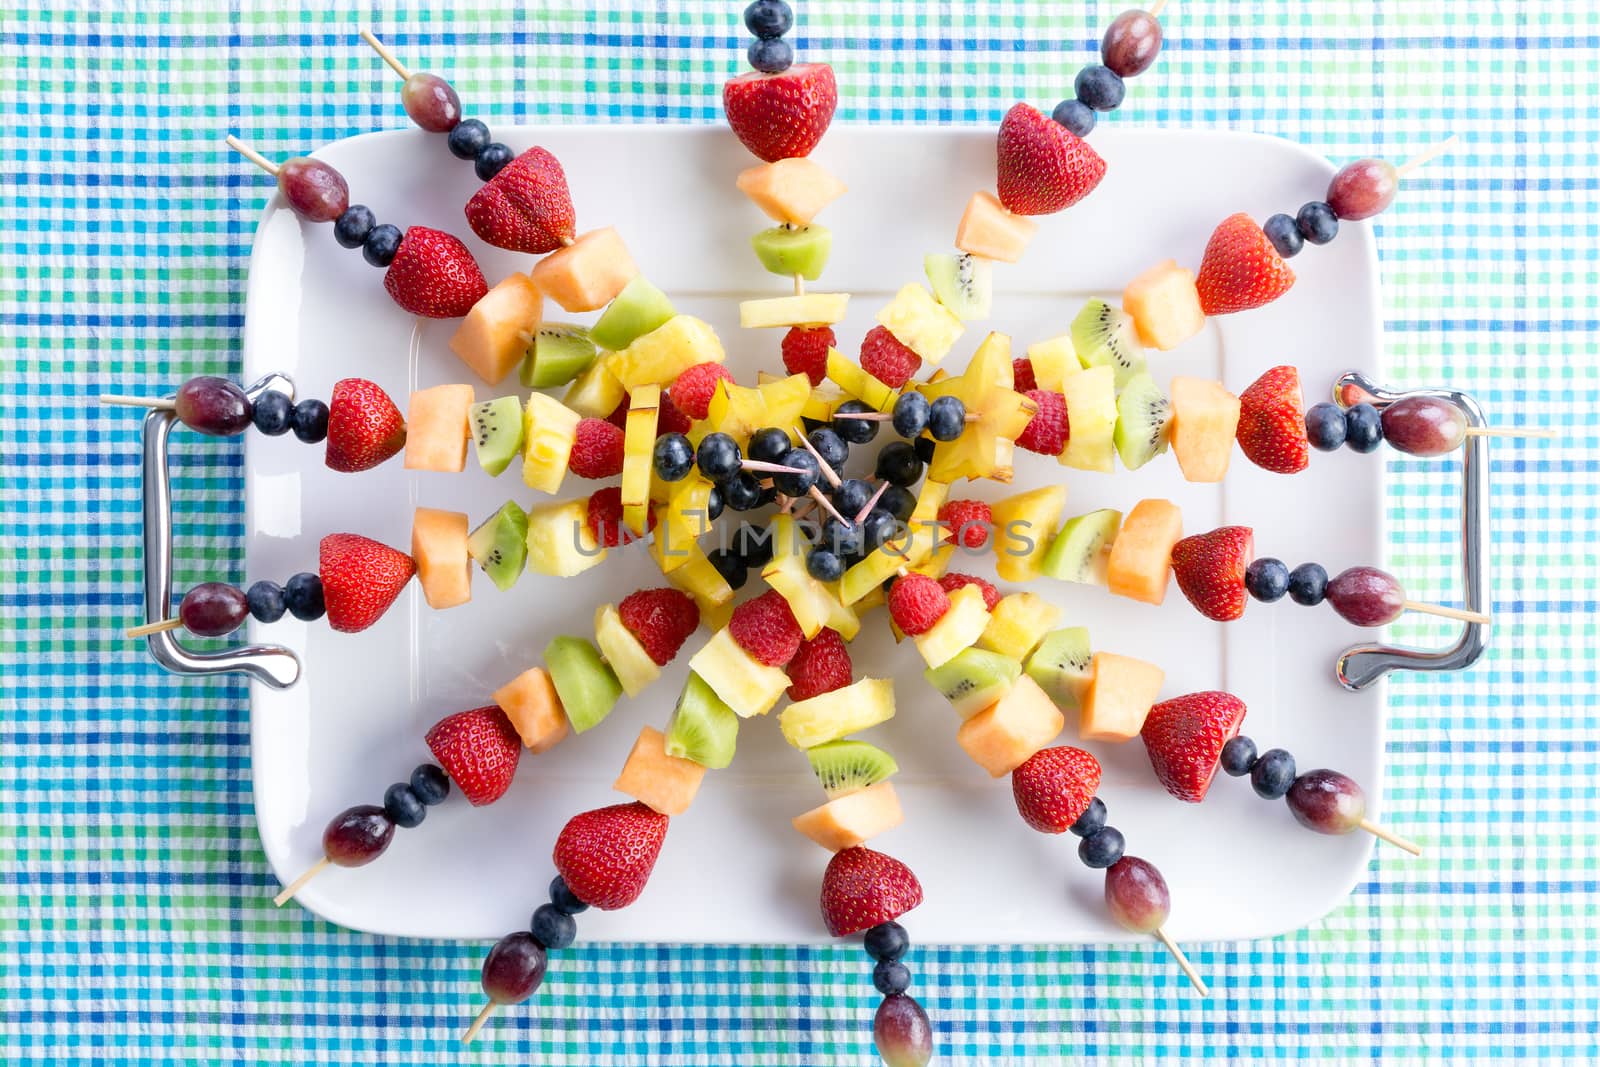 Presentation of colorful healthy fresh fruit kebabs on a summer picnic table made with seasonal exotic and tropical fruit for a gourmet dessert, overhead view